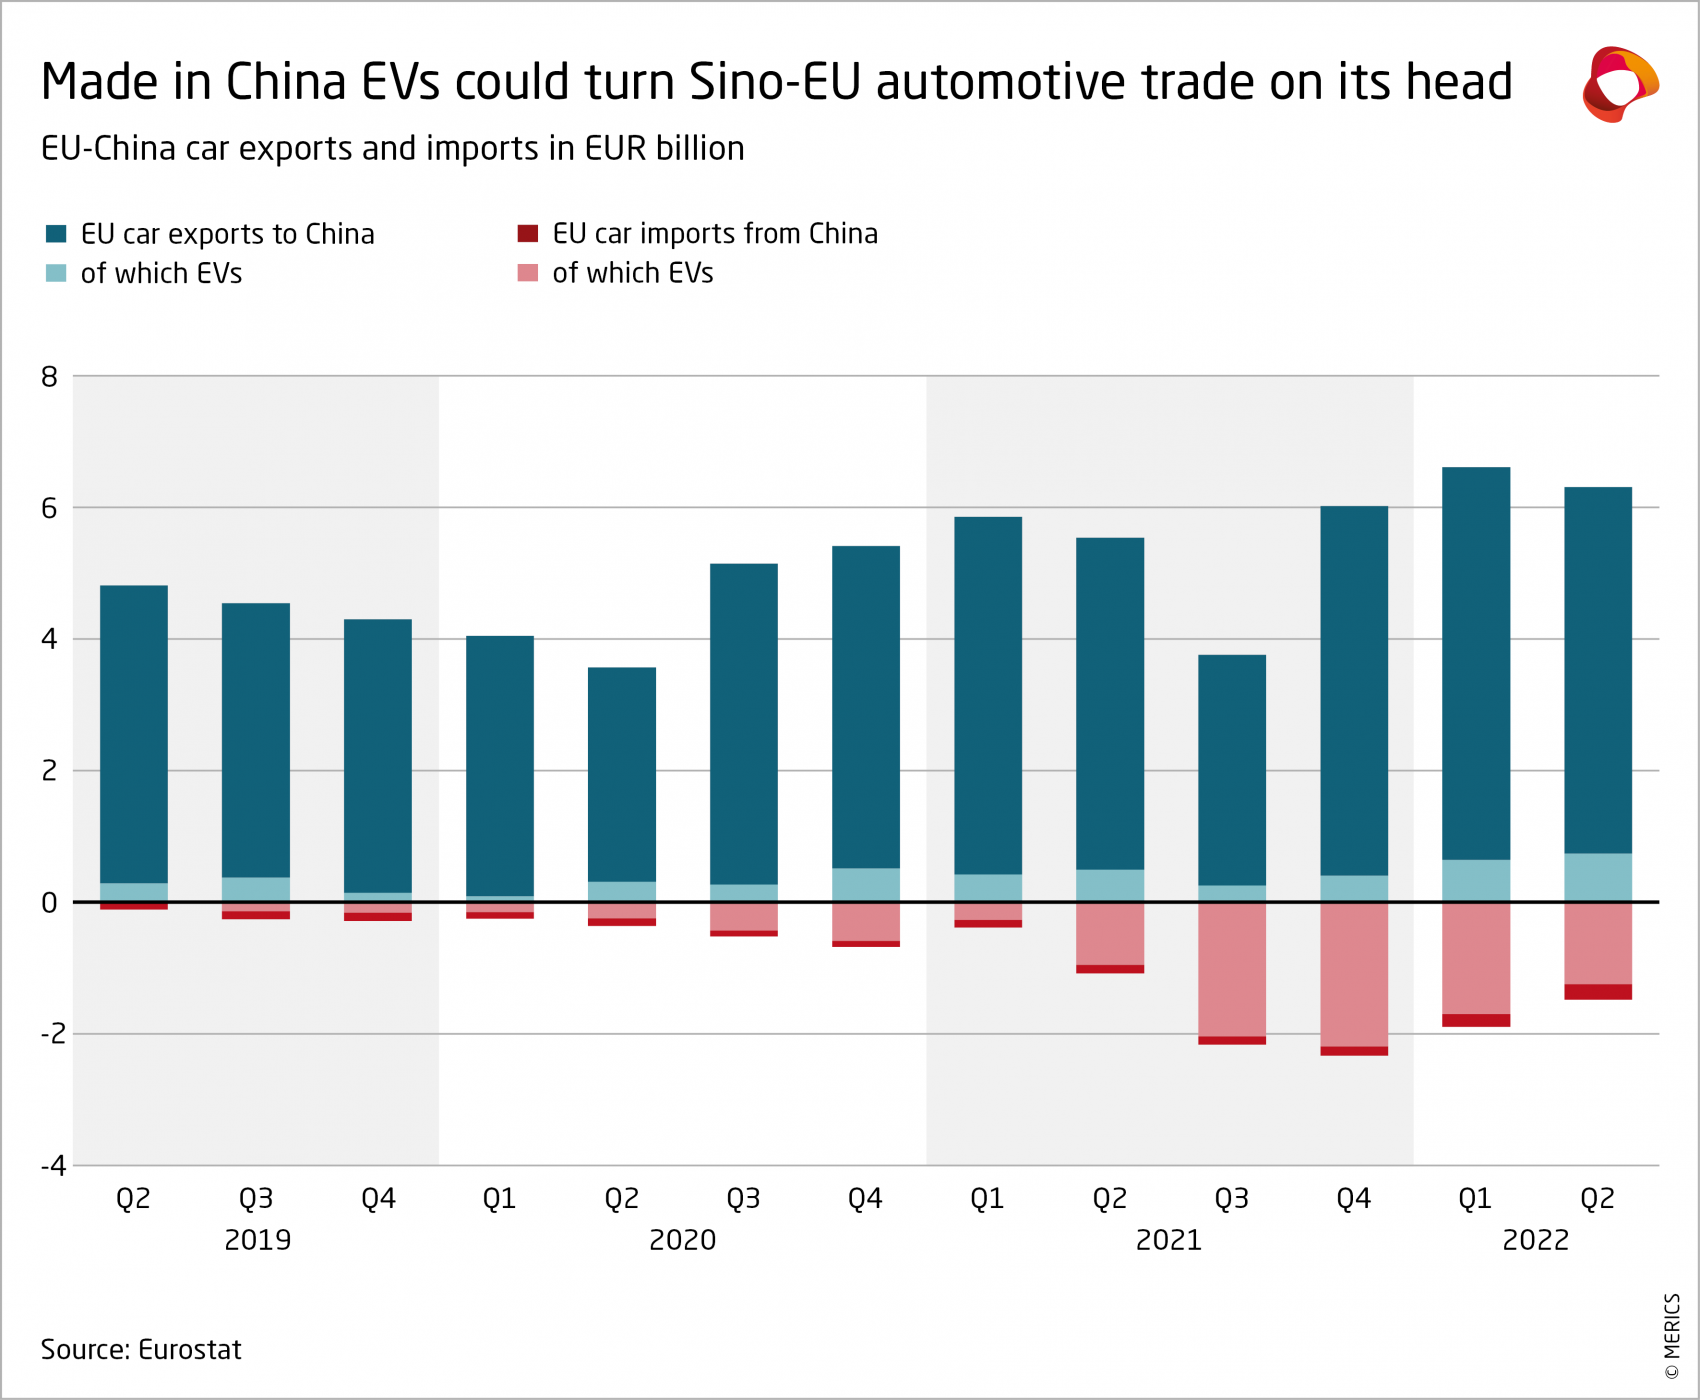 MERICS-Automotive-RD-in-China-Made-in-China-EVs-could-turn-Sino-EU-automotive-trade-on-its-head-Exhibit-8.png